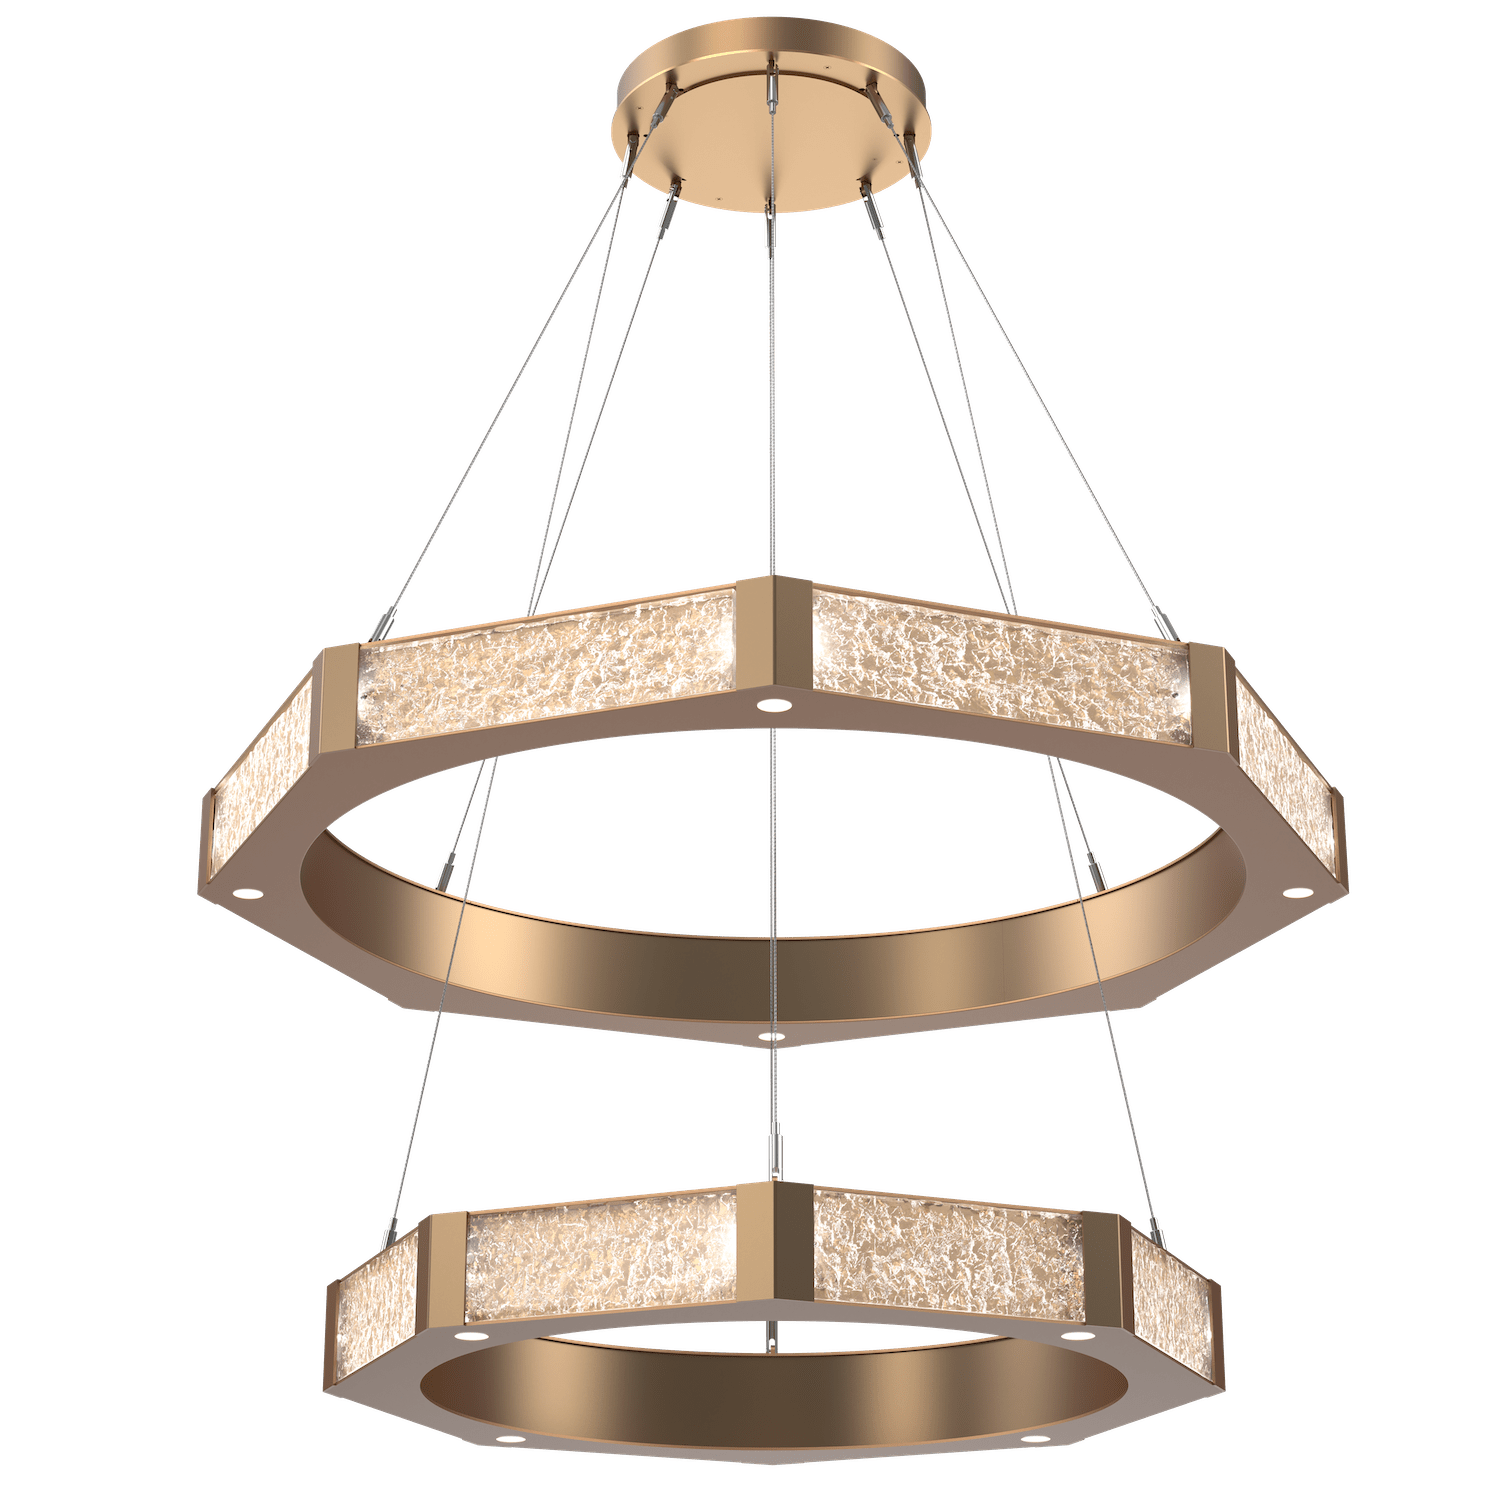 CHB0061-2B-NB-GC-Hammerton-Studio-Glacier-48-inch-two-tier-ring-chandelier-with-novel-brass-finish-and-clear-blown-glass-with-geo-clear-cast-glass-diffusers-and-LED-lamping